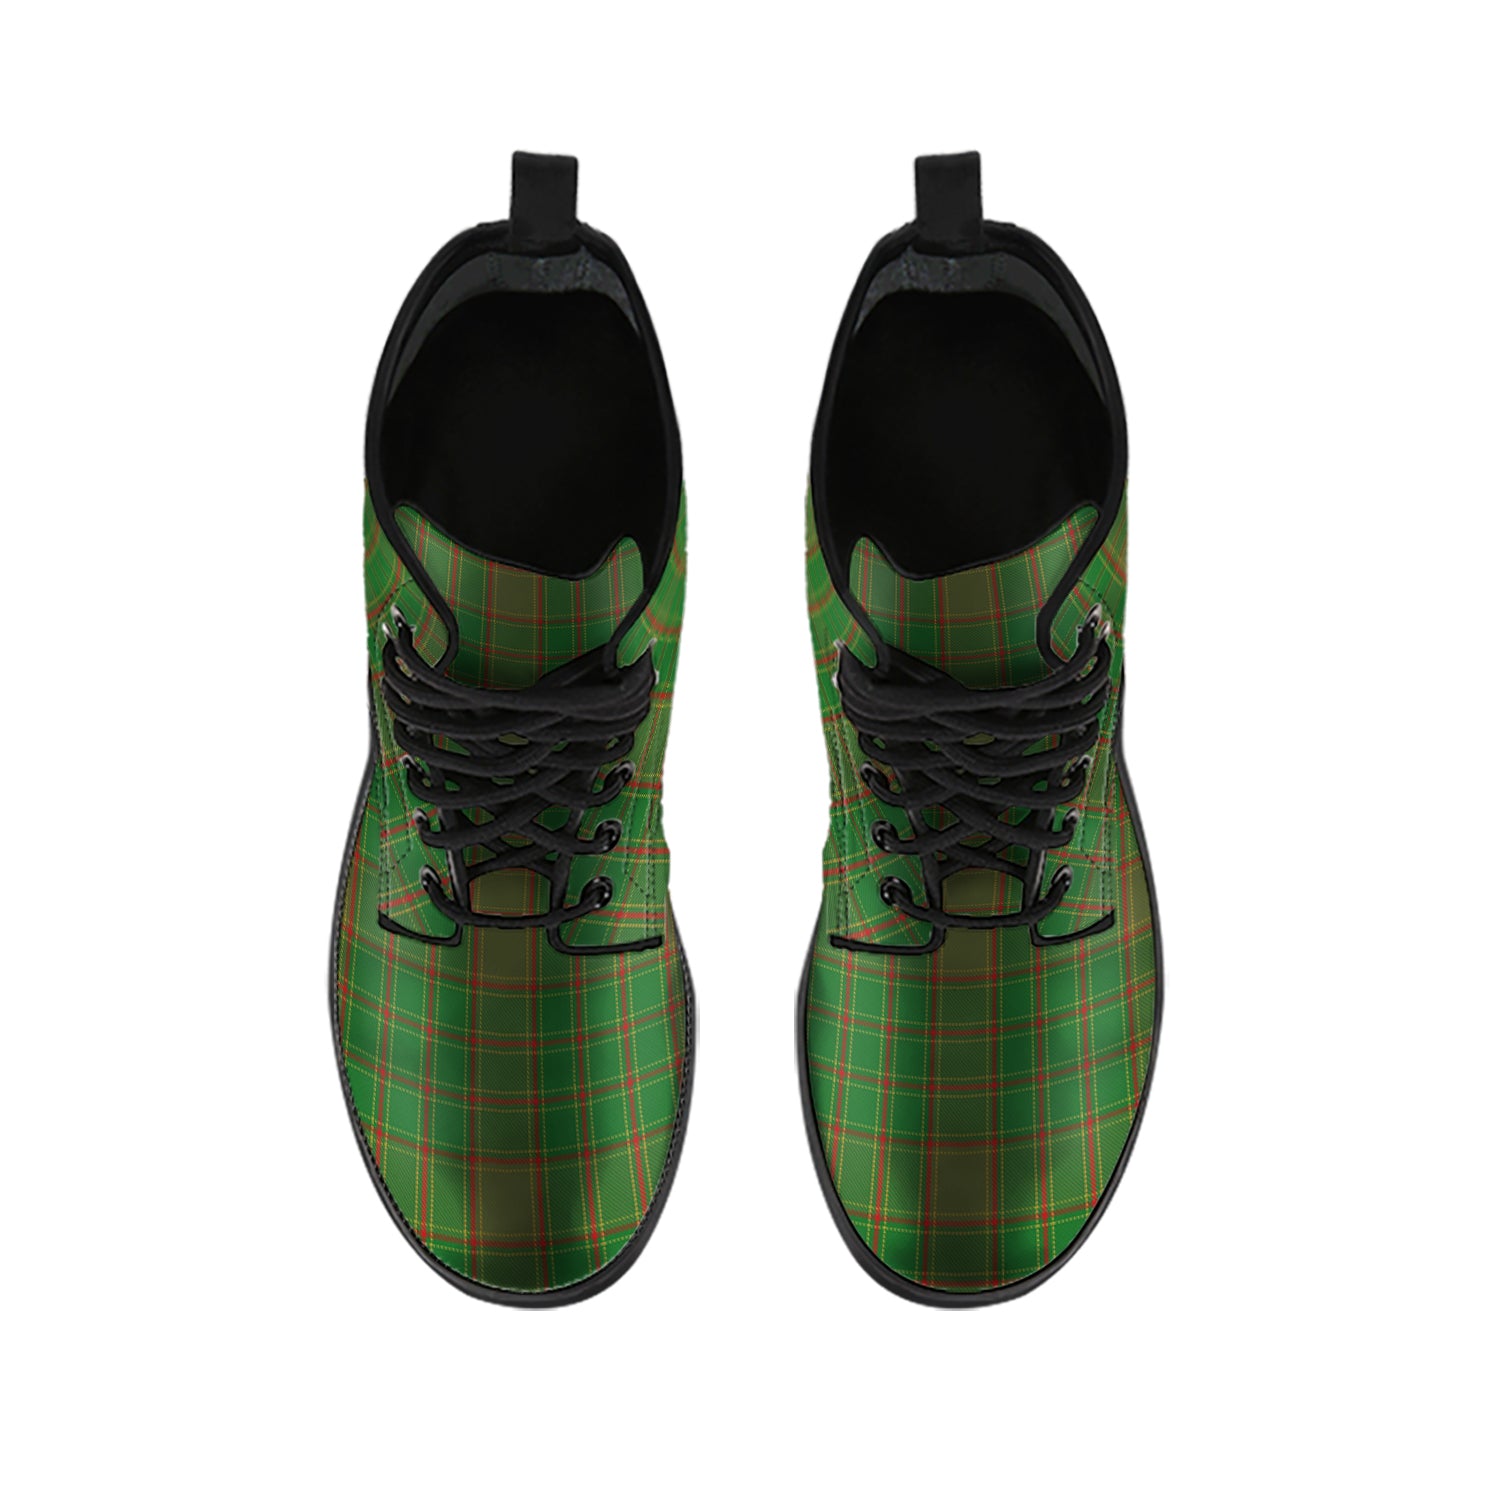 terry-tartan-leather-boots